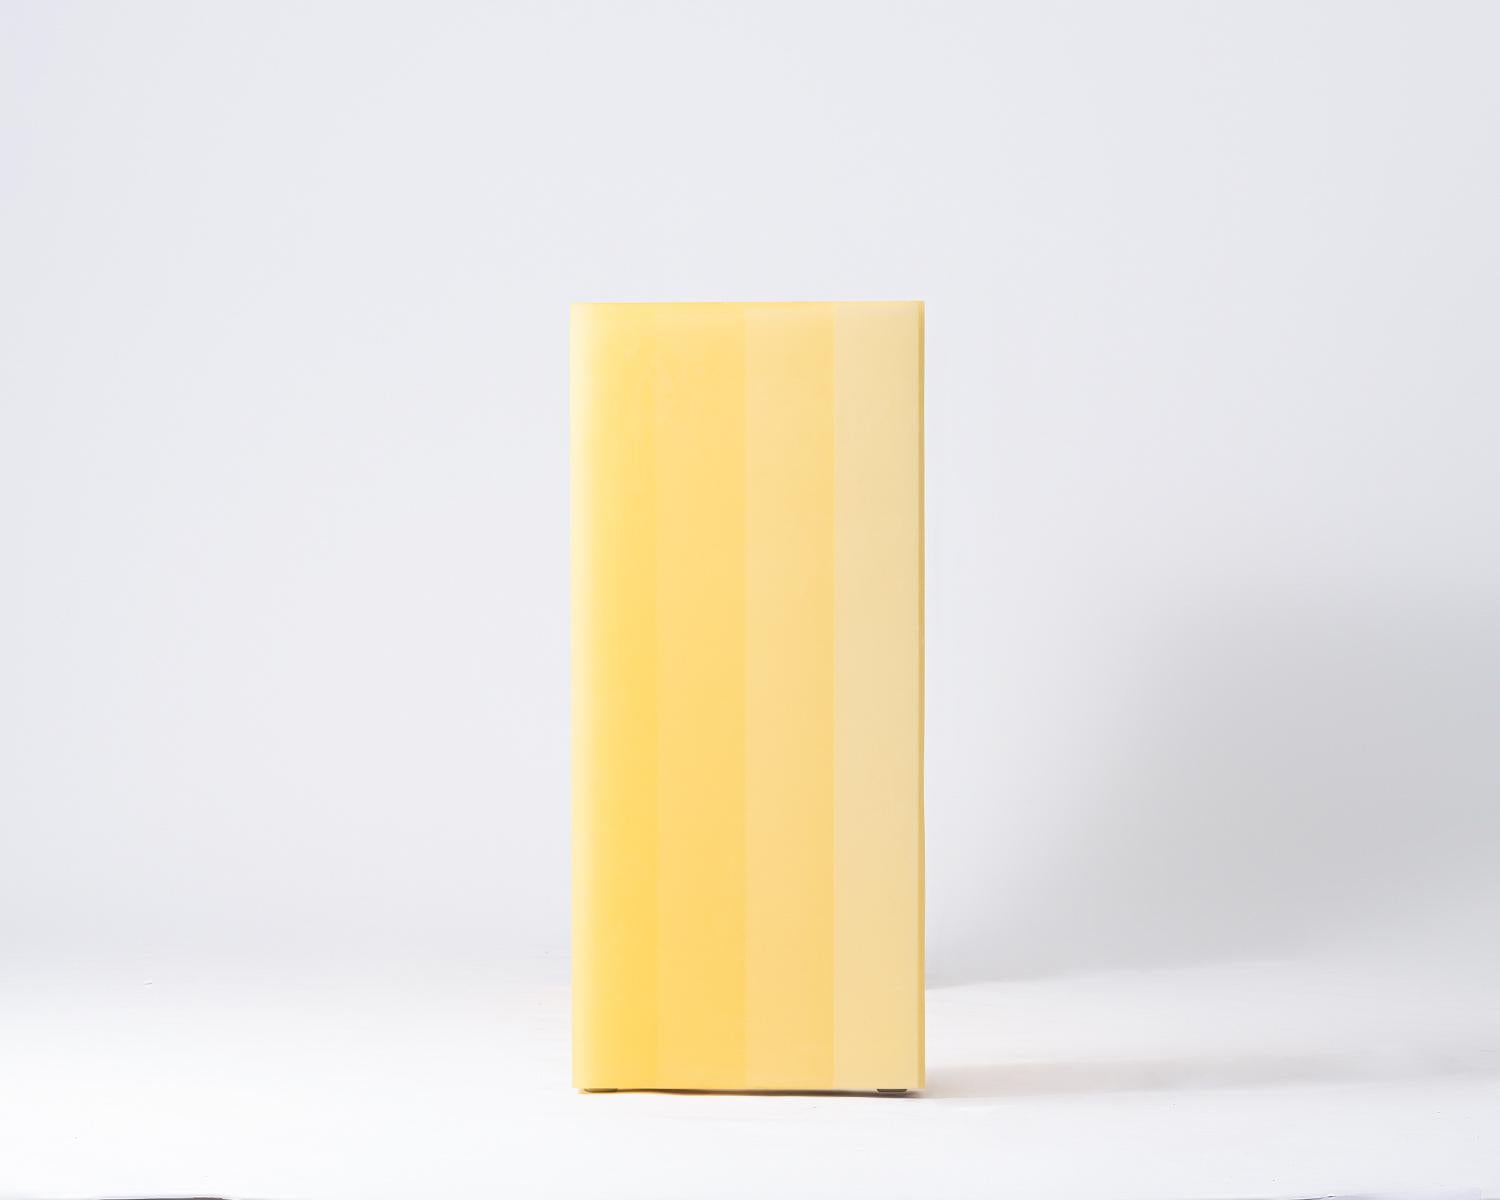 American Scale Resin Console/Console Table in Yellow by Facture, REP by Tuleste Factory For Sale